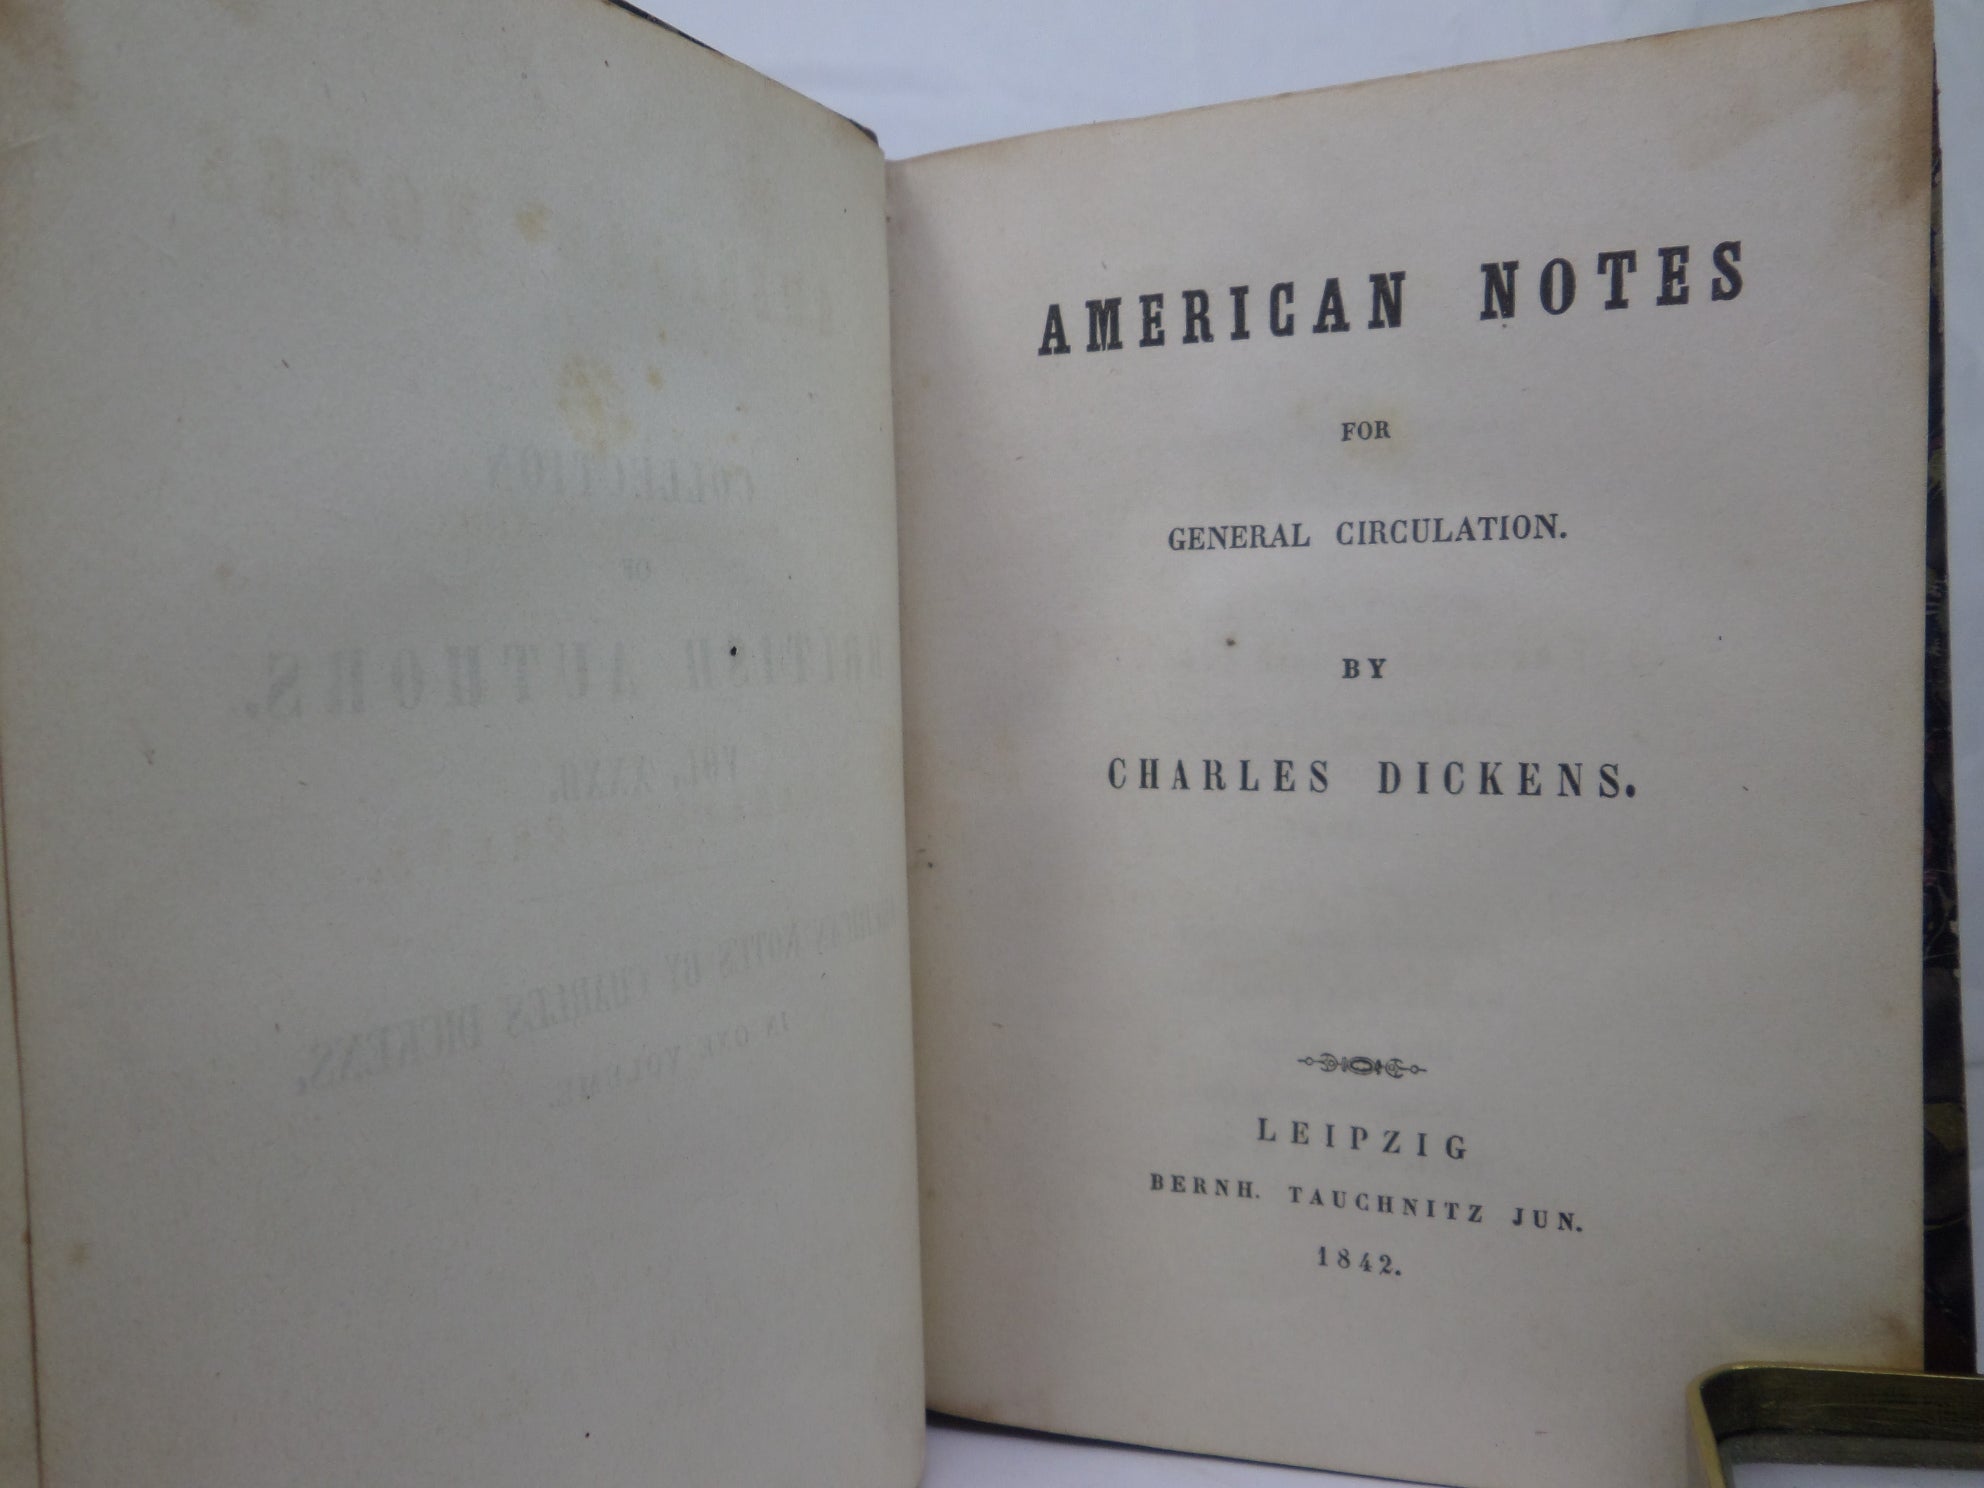 AMERICAN NOTES BY CHARLES DICKENS 1842 LEATHER BINDING